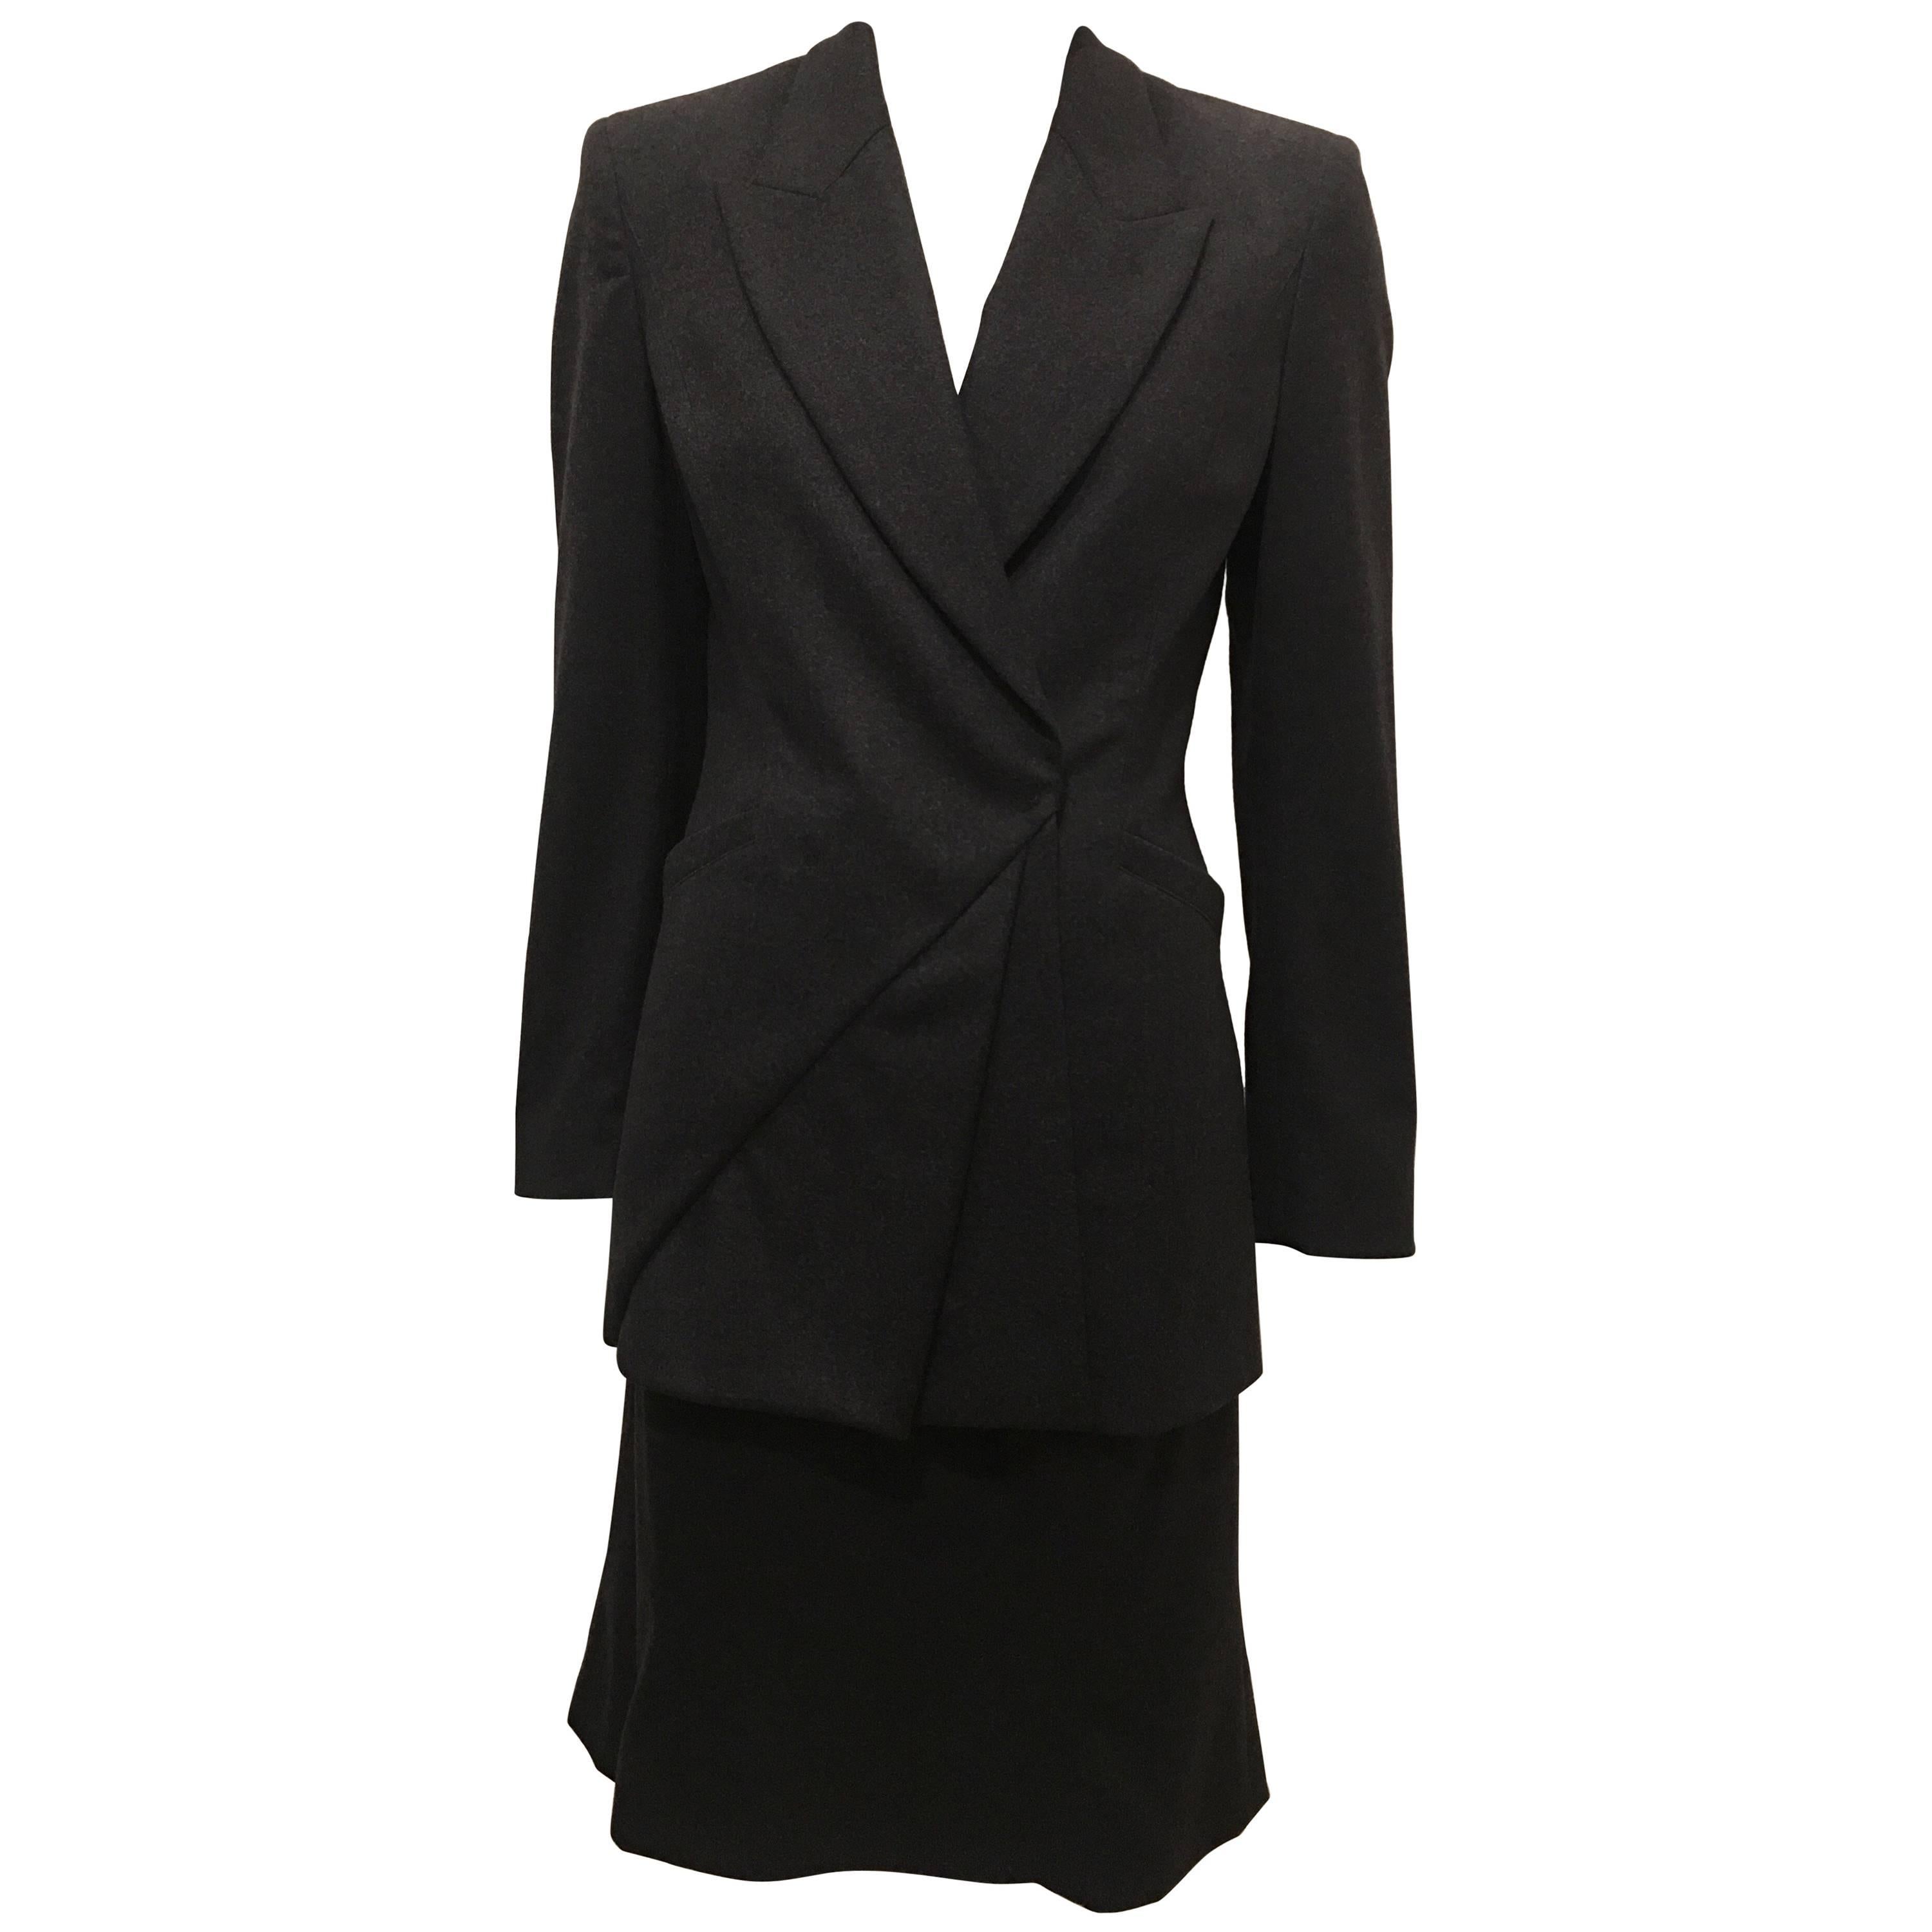 Dark gray wool suit skirt from Claude Montana. Zips at the left side. Straight, hits at mid thigh. Made in Italy. Perfect for winter workwear or everyday wear. Neutral color will go with everything and simple design allows for it to be dressed up or